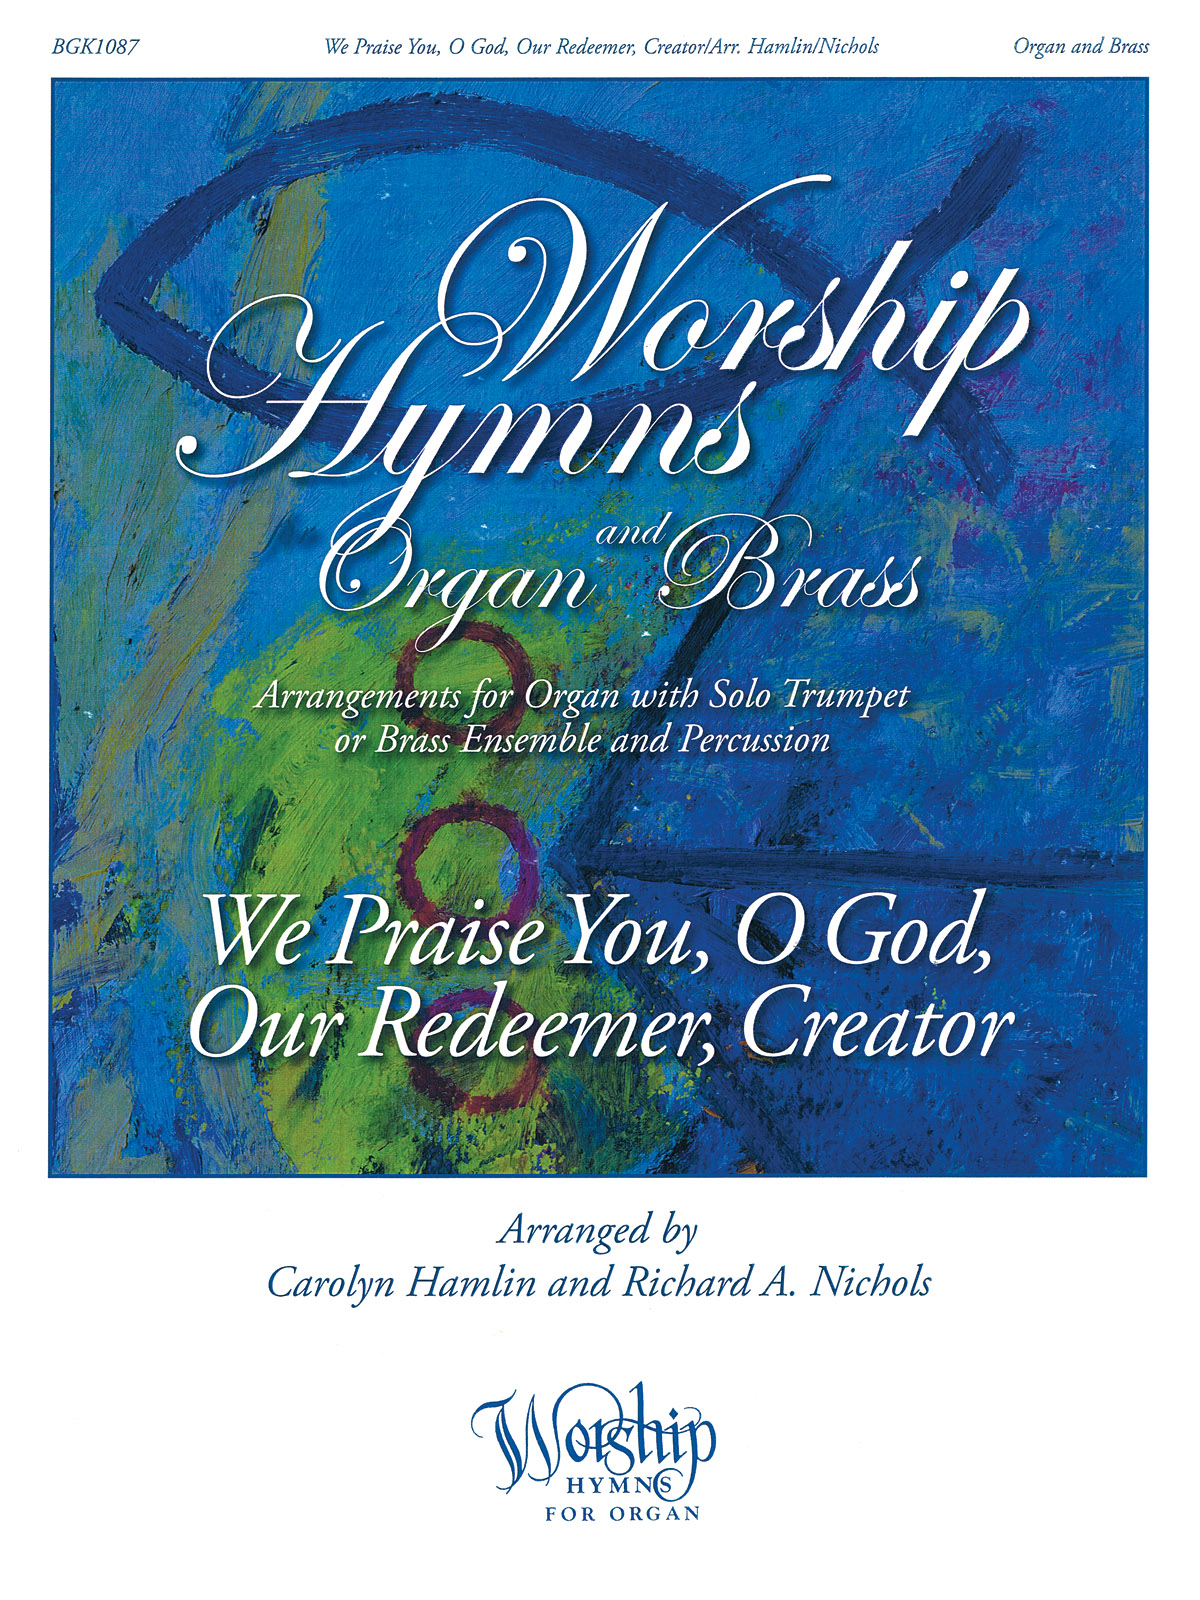 We Praise You, O God, Our Redeemer, Creator - Worship Hymns for Organ and Brass - noty na varhany